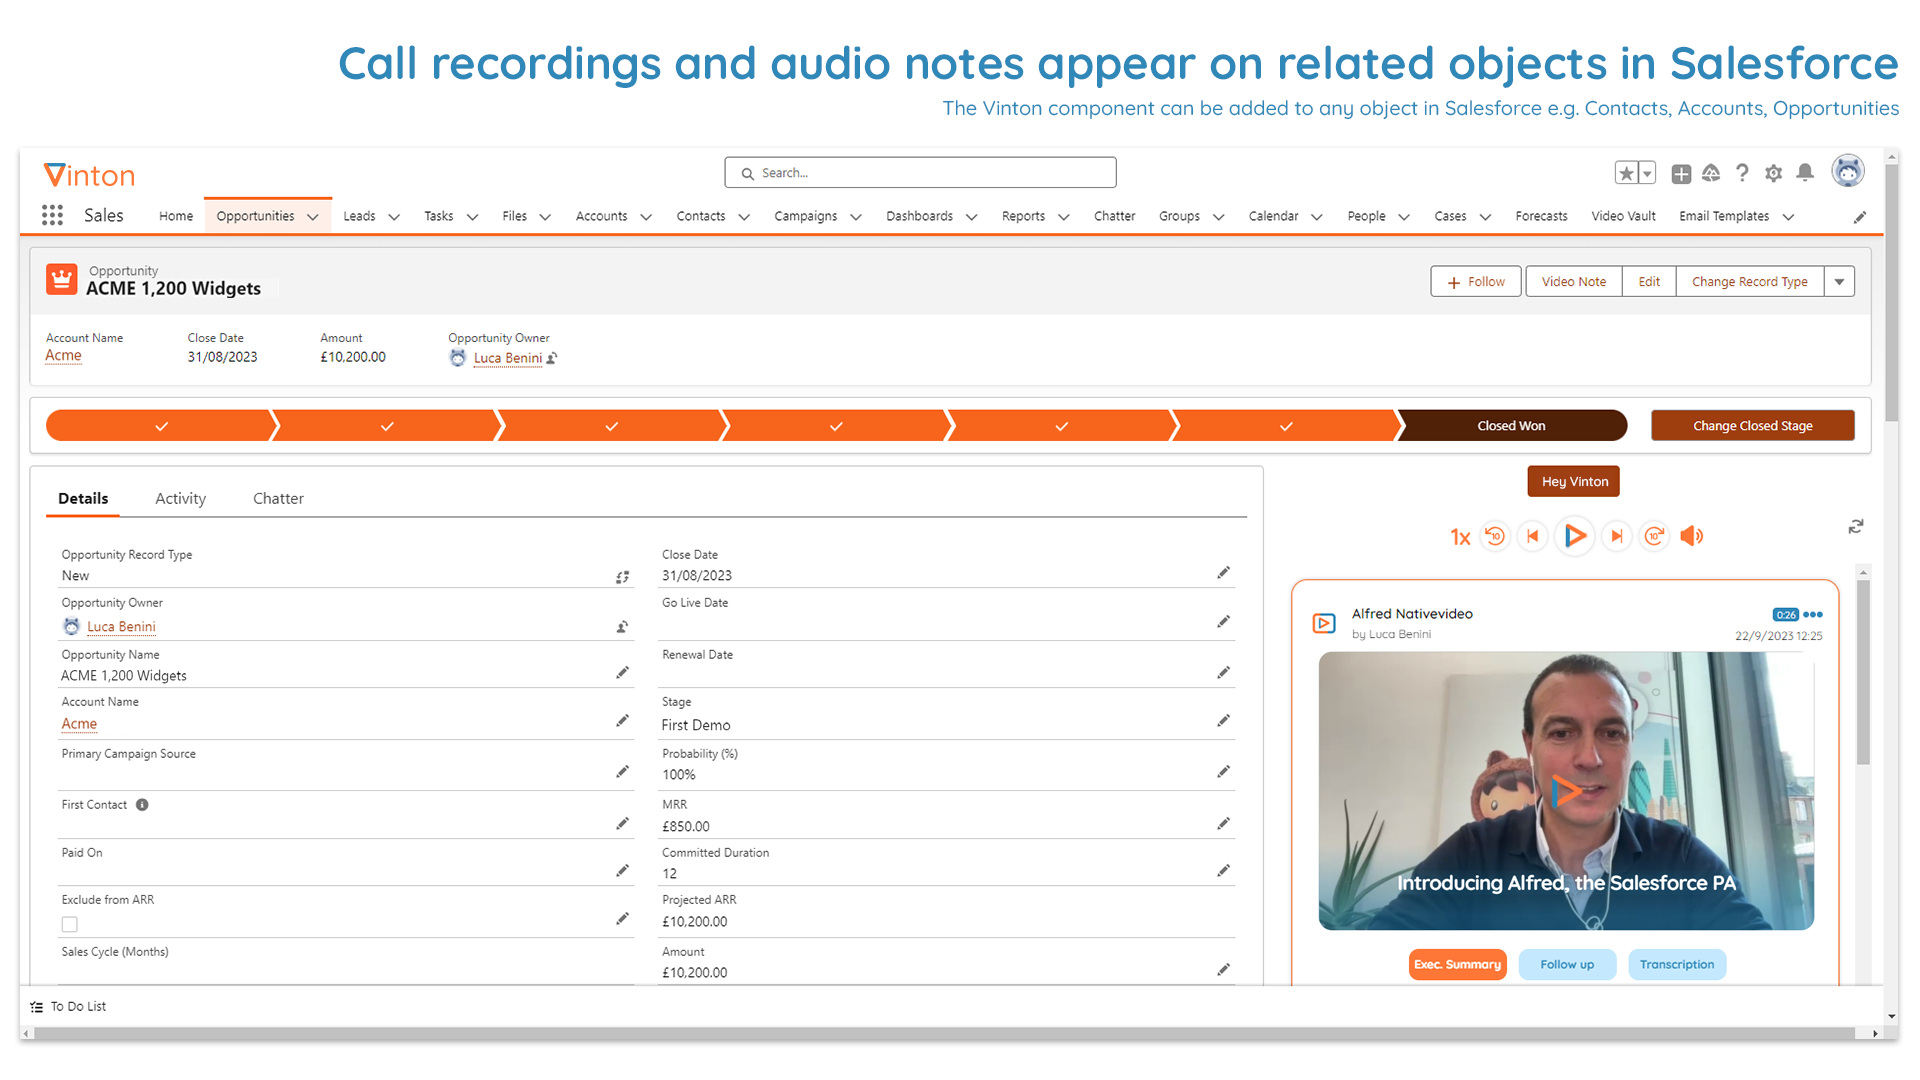 Vinton's call recordings and notes are saved against related records in Salesforce such as Leads, Contacts, Accounts and Opportunities.